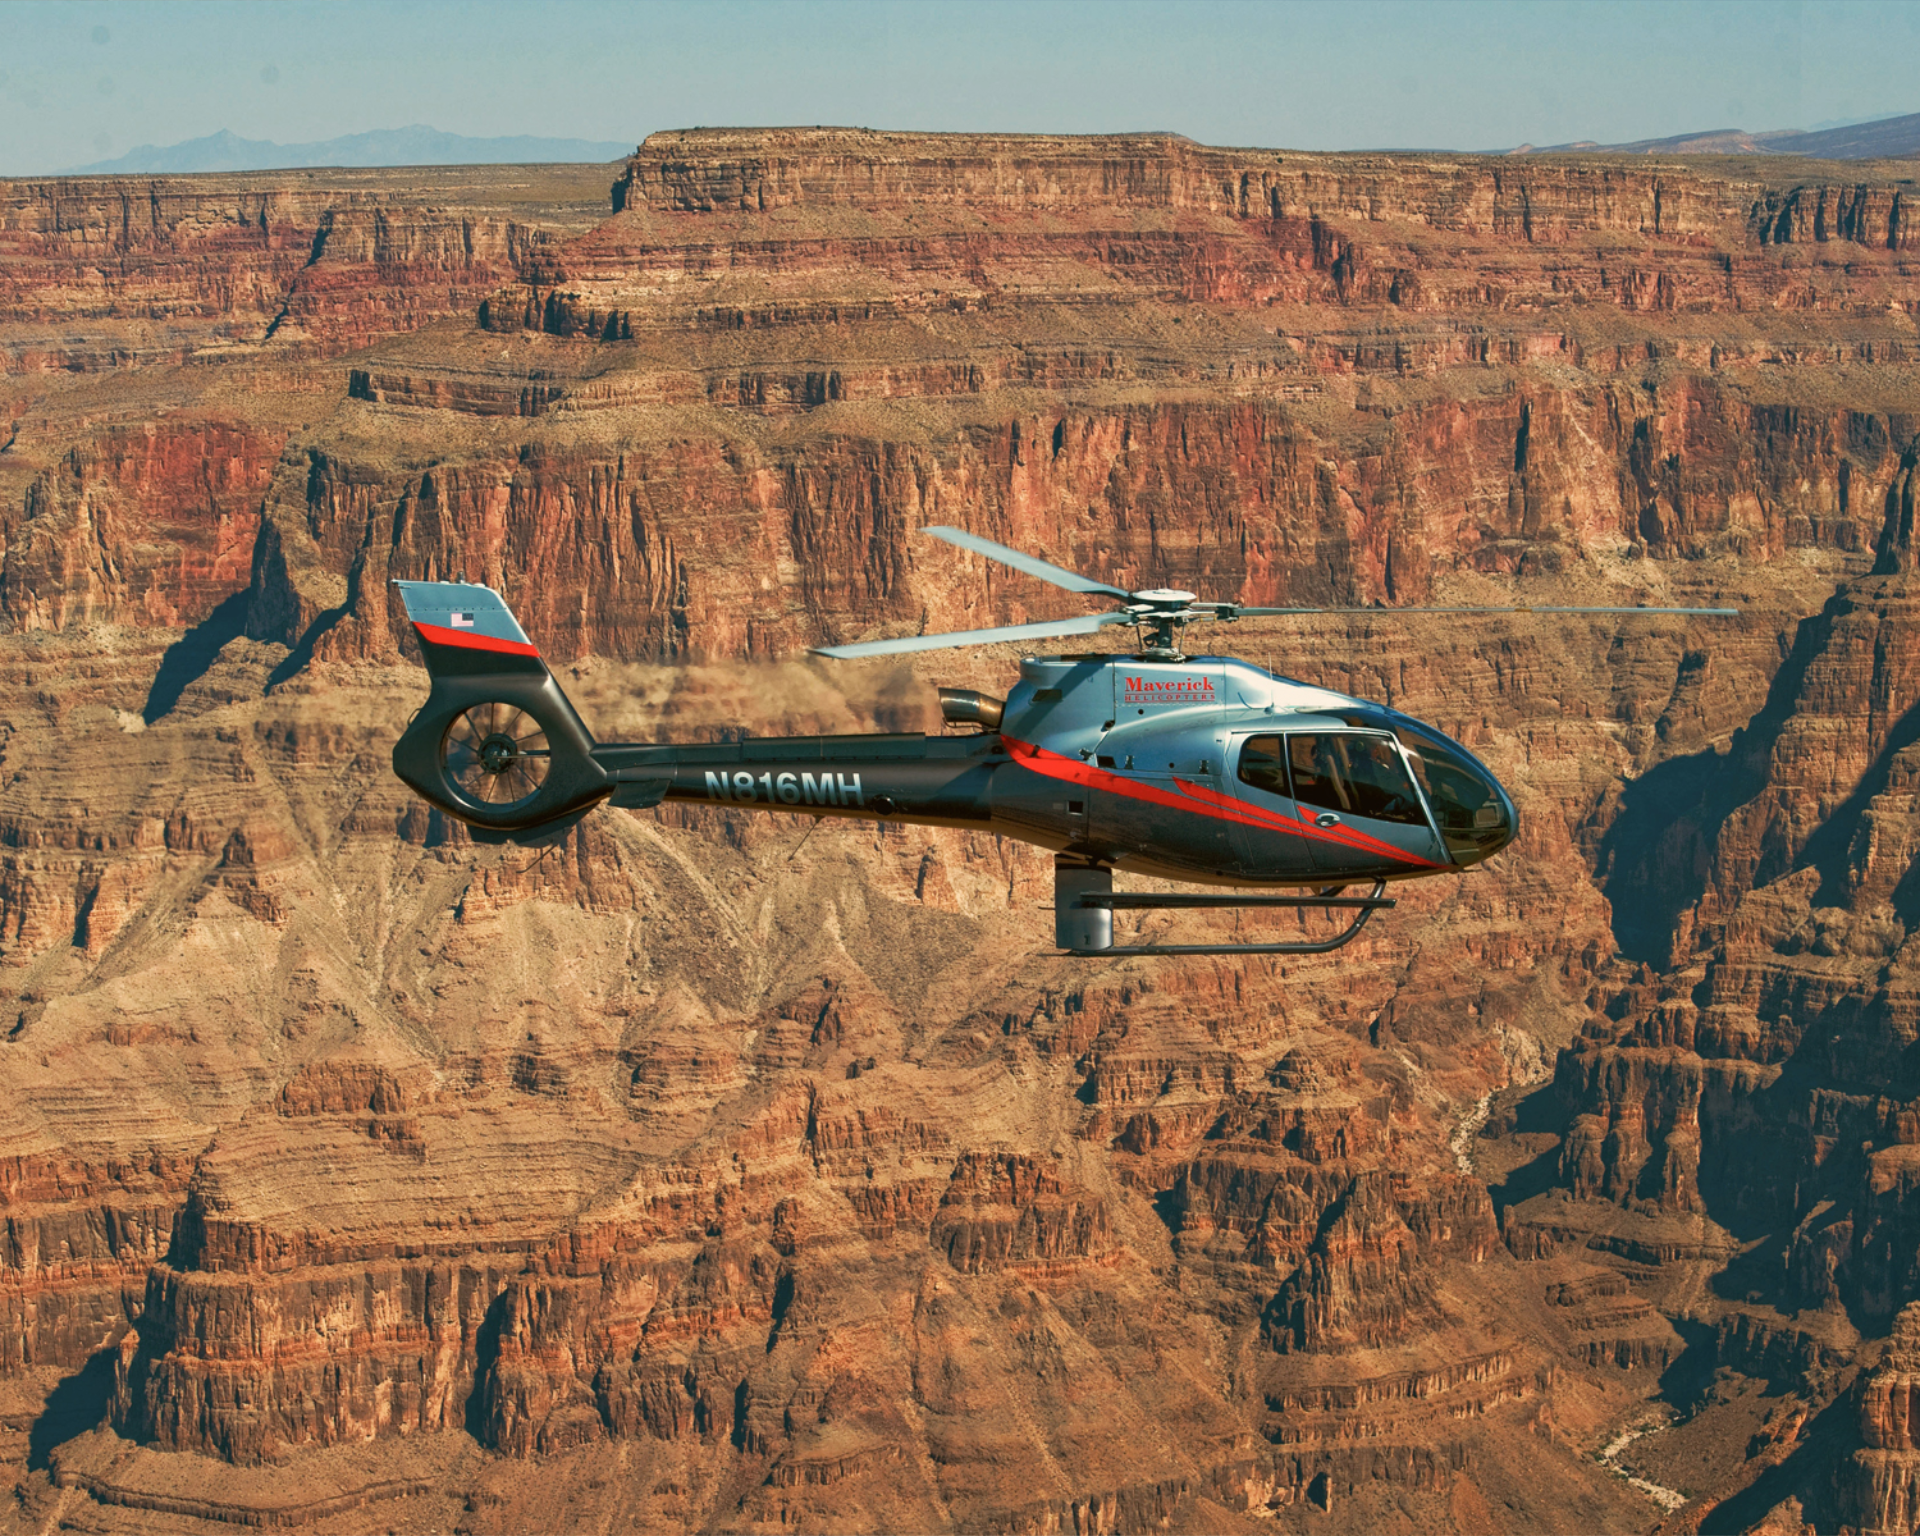 Helicopter ride over the Grand Canyon National Park.